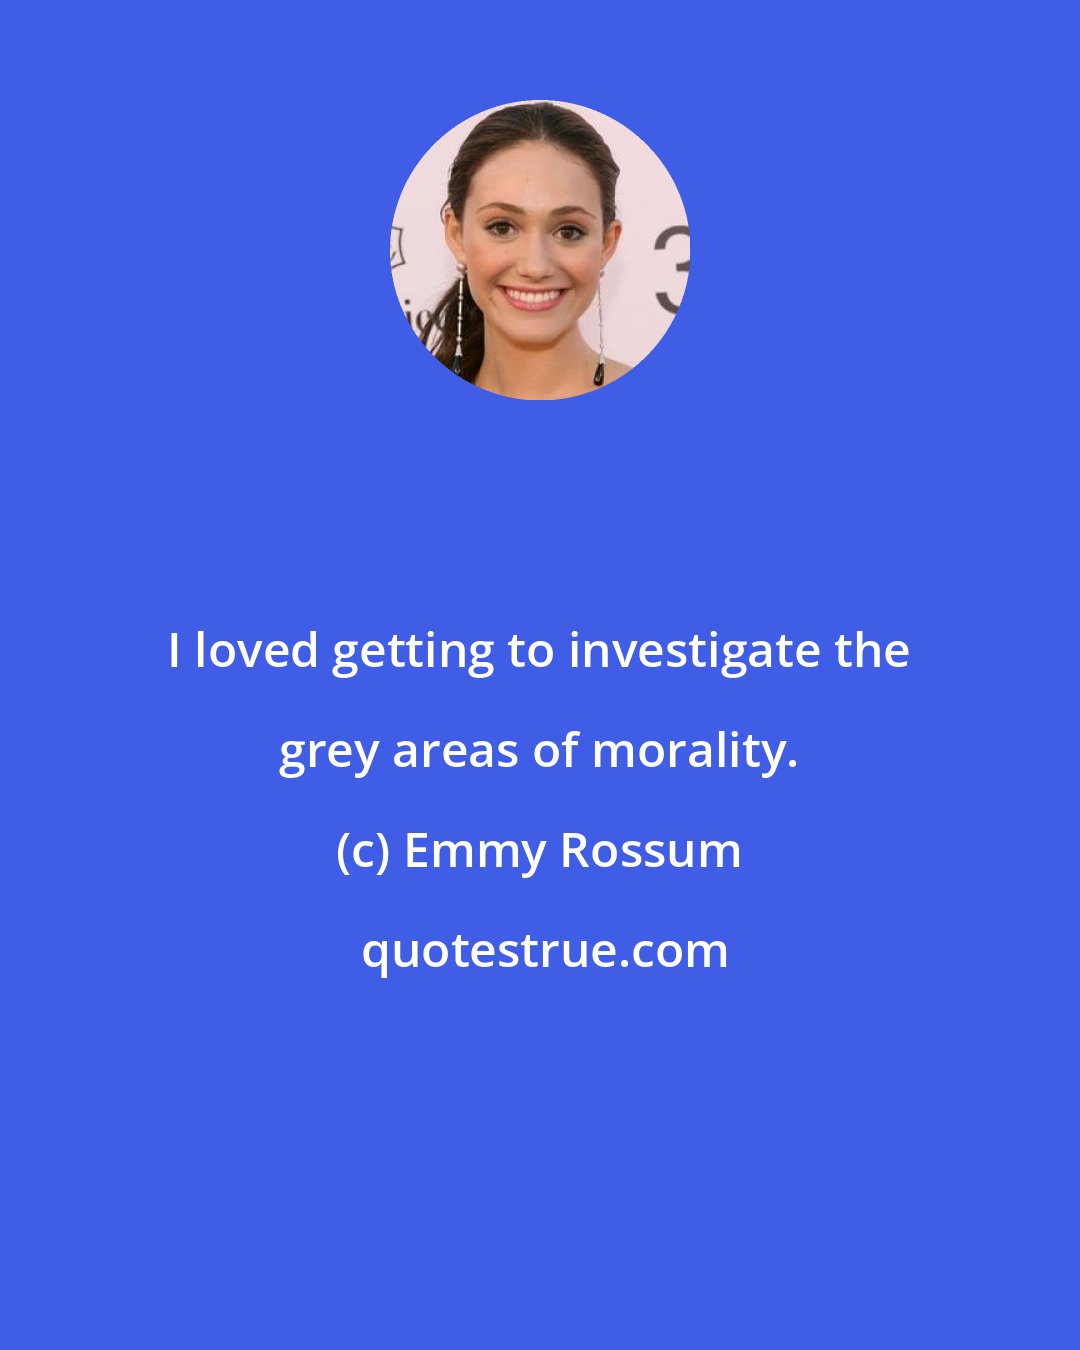 Emmy Rossum: I loved getting to investigate the grey areas of morality.